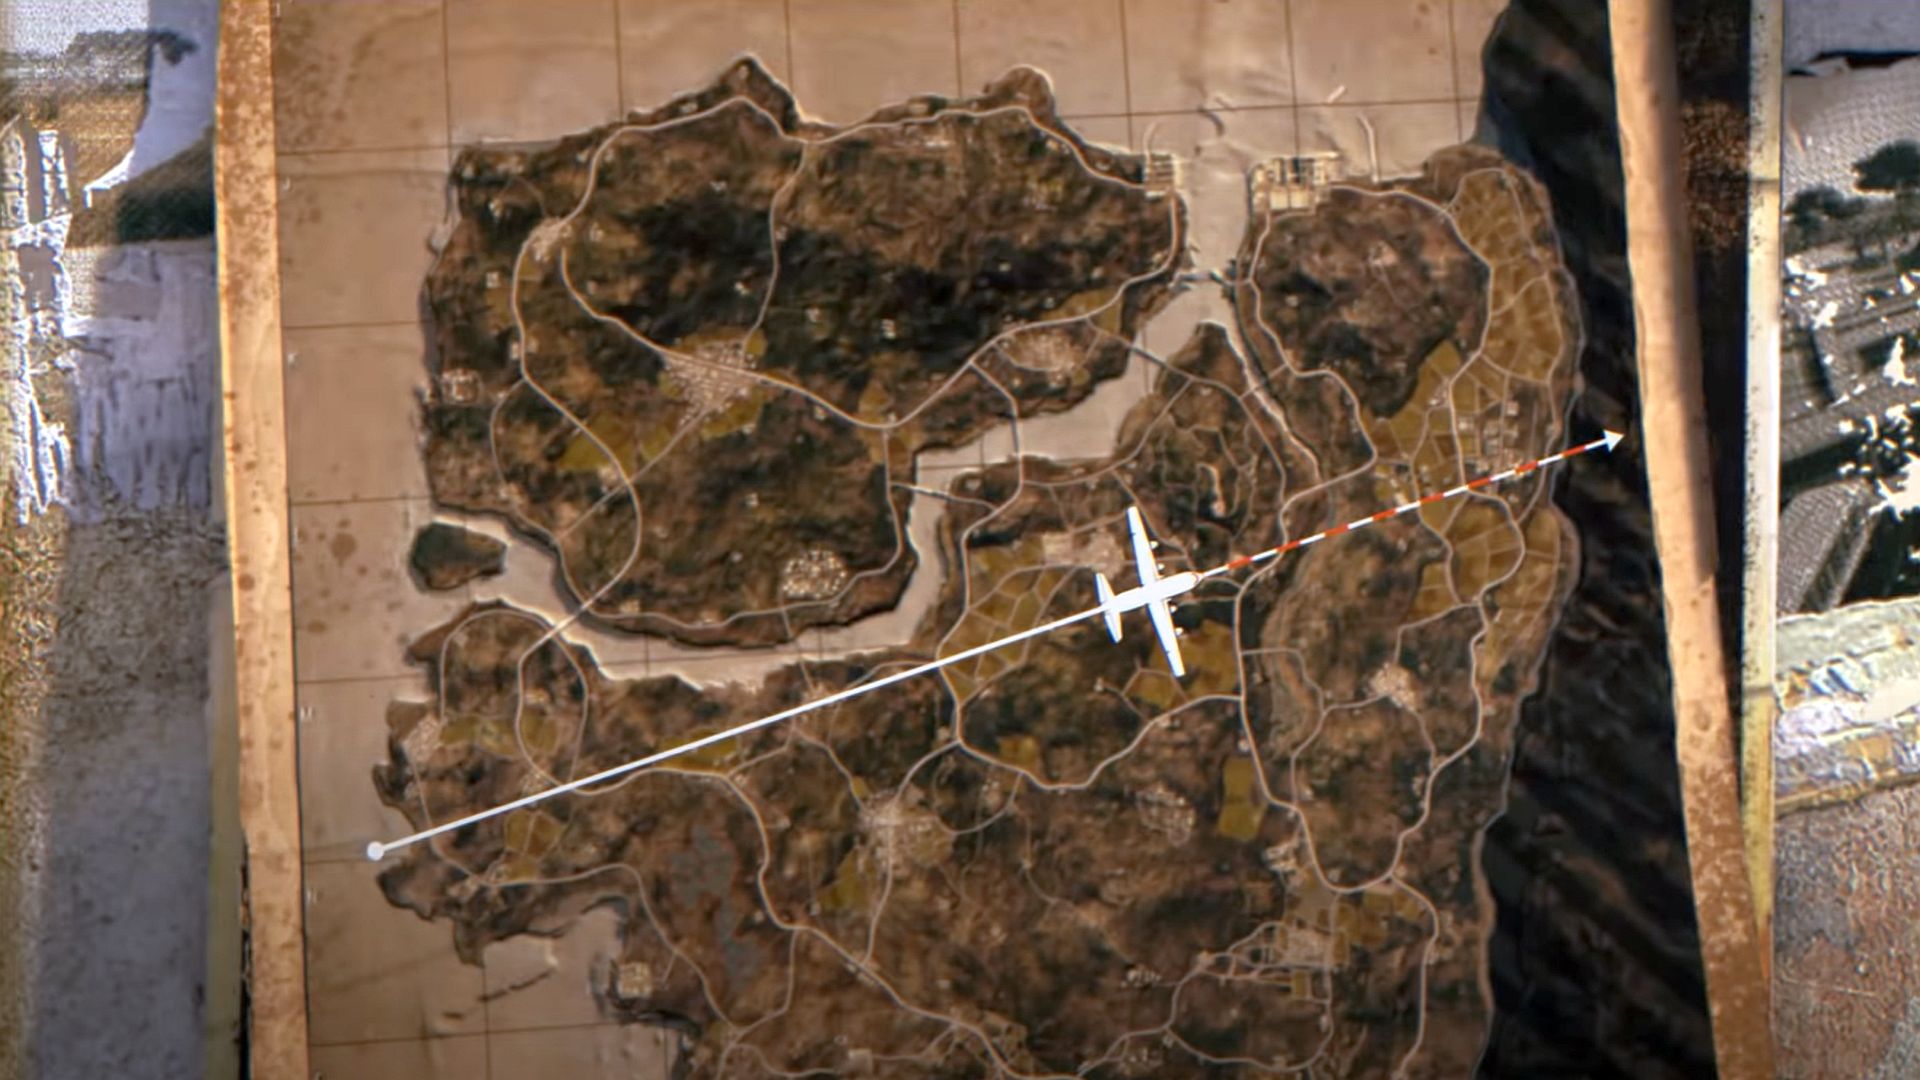 PUBG gets its first 8×8 map since Miramar with ‘Taego’ next update